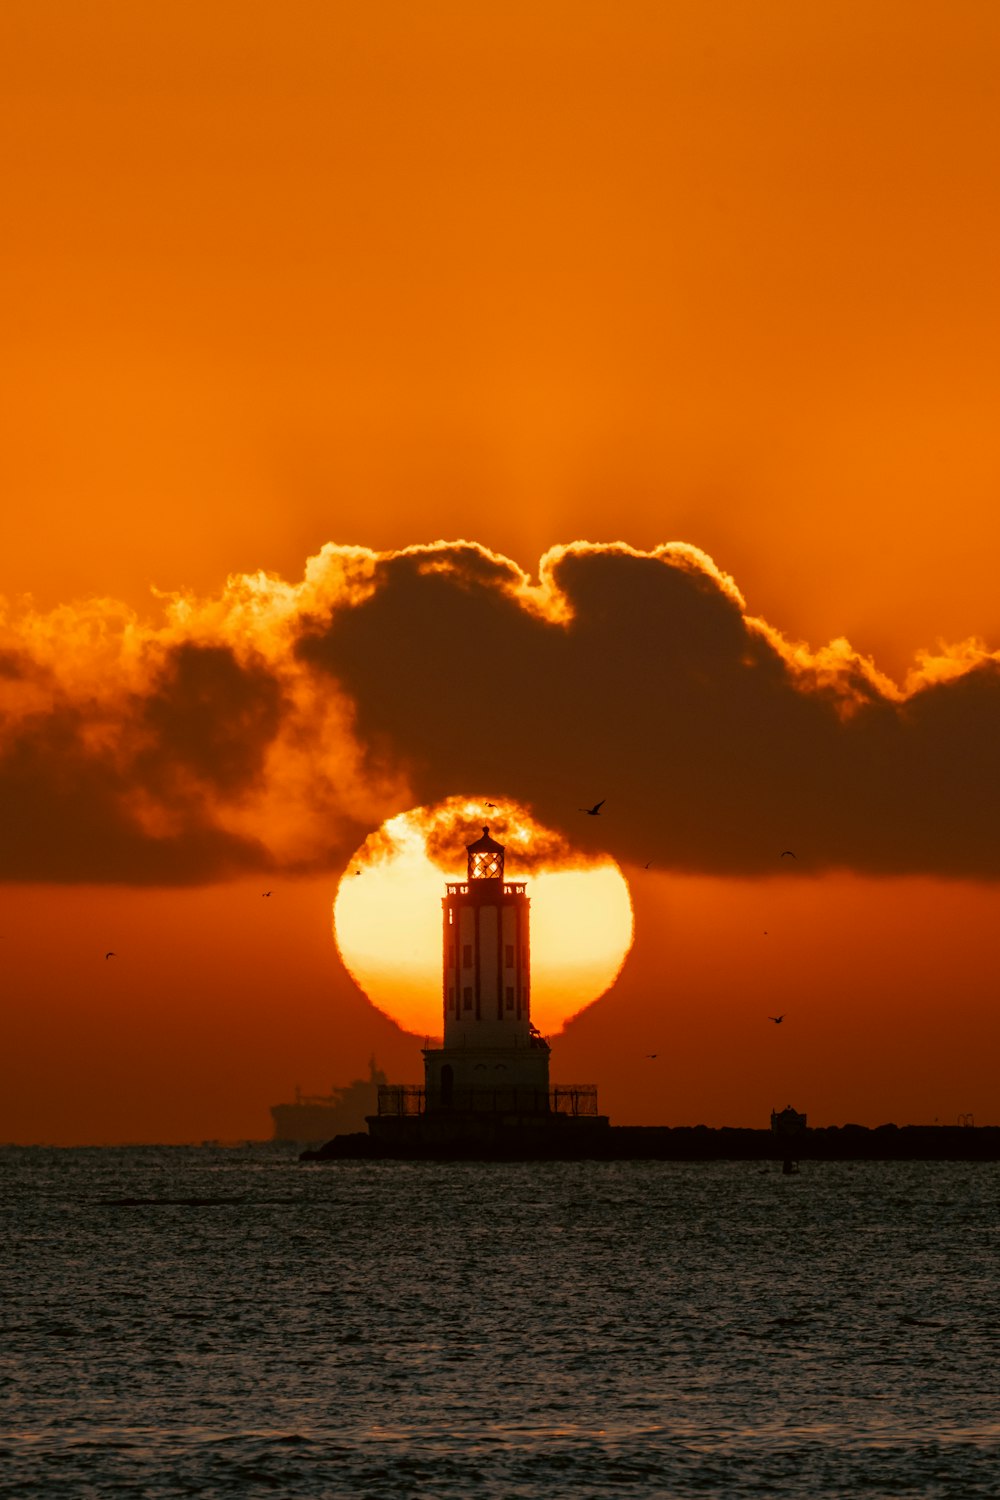 the sun is setting behind a lighthouse in the ocean